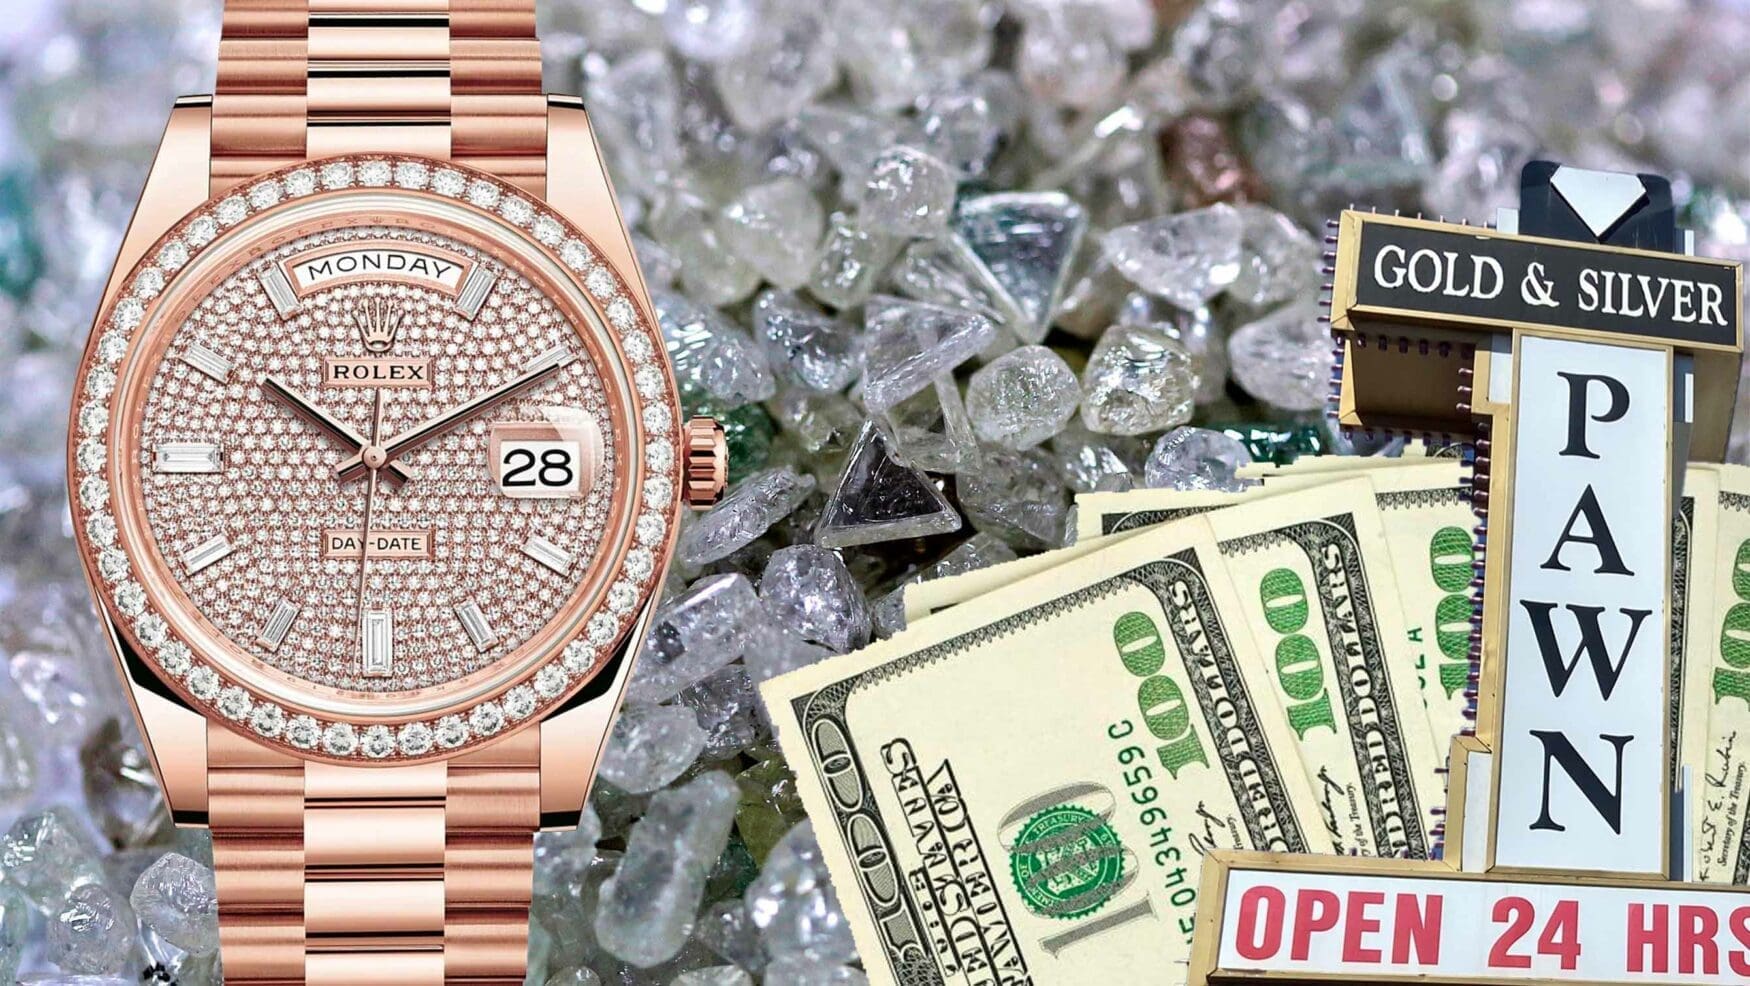 How much are diamonds in watches worth?